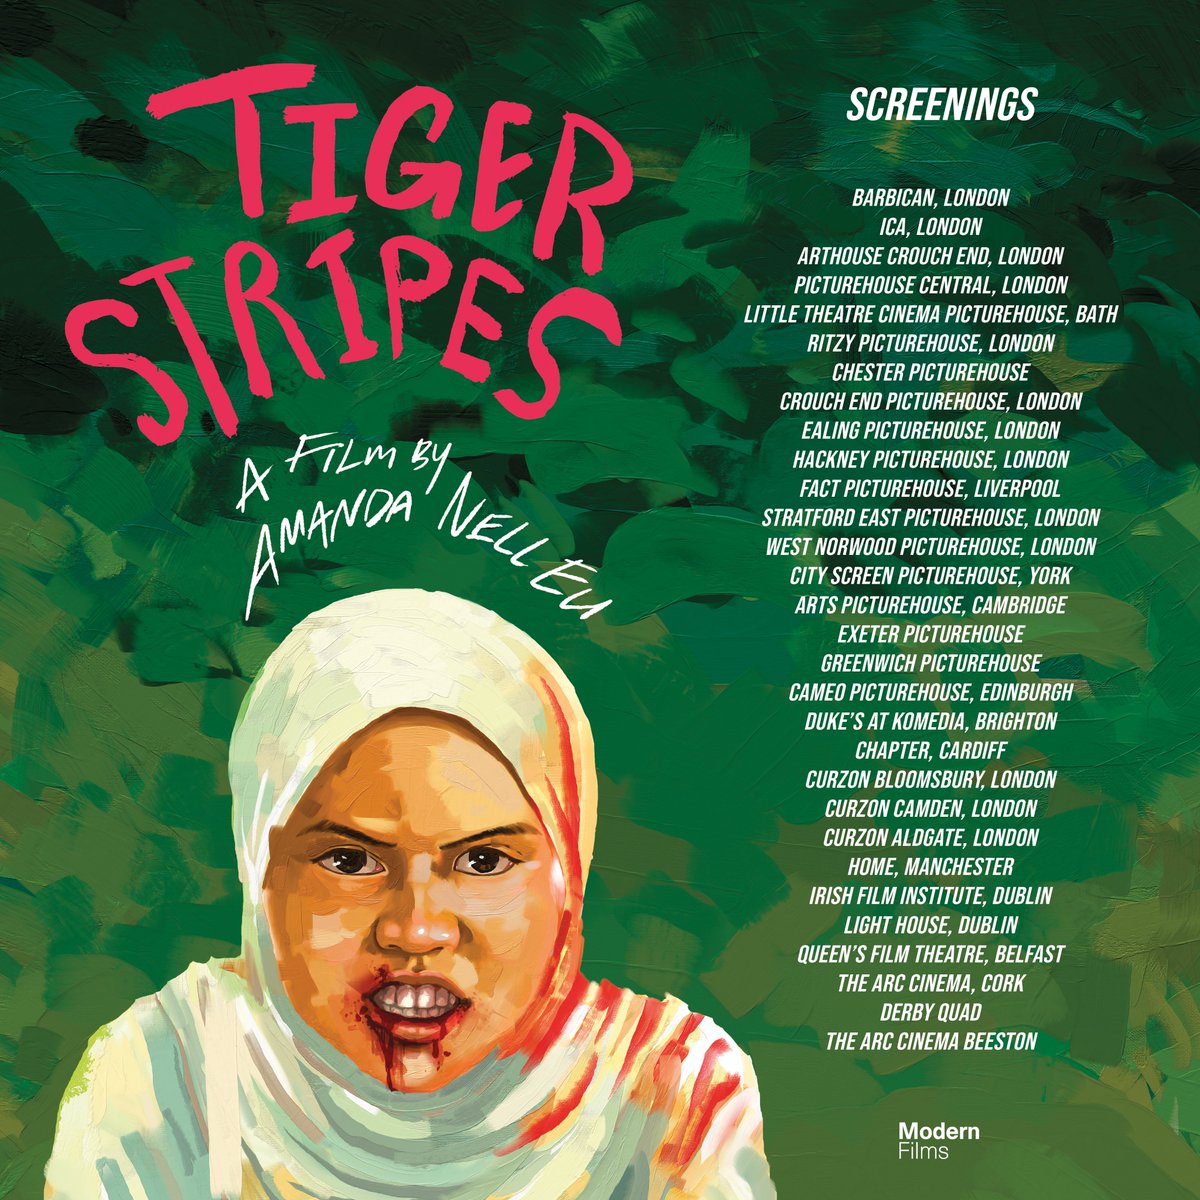 Amanda Nell Eu’s Cannes award-winning film TIGER STRIPES is now screening in cinemas across the UK and Ireland! Book tickets at your local cinema this weekend: modernfilms.com/tigerstripes